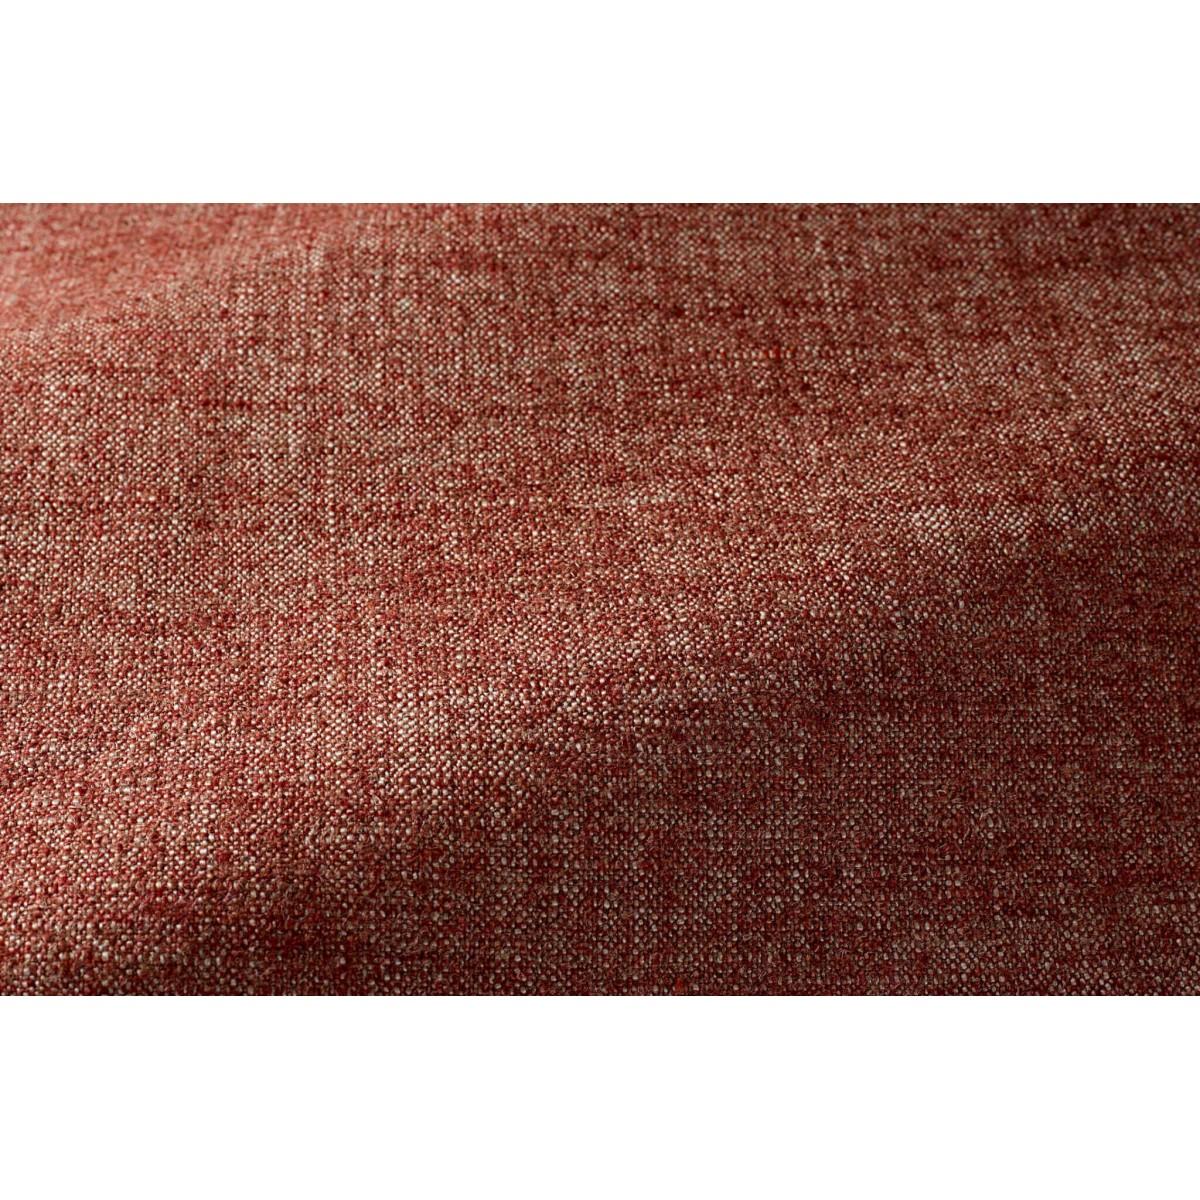 Popus Editions Giovanna 2.5 seater sofa in Marrakesh London Linen Fabric

Giovanna is a sofa with a strong profile. A sober, plush line, with this famous detail that changes everything, so as not to forget its strength of character and this